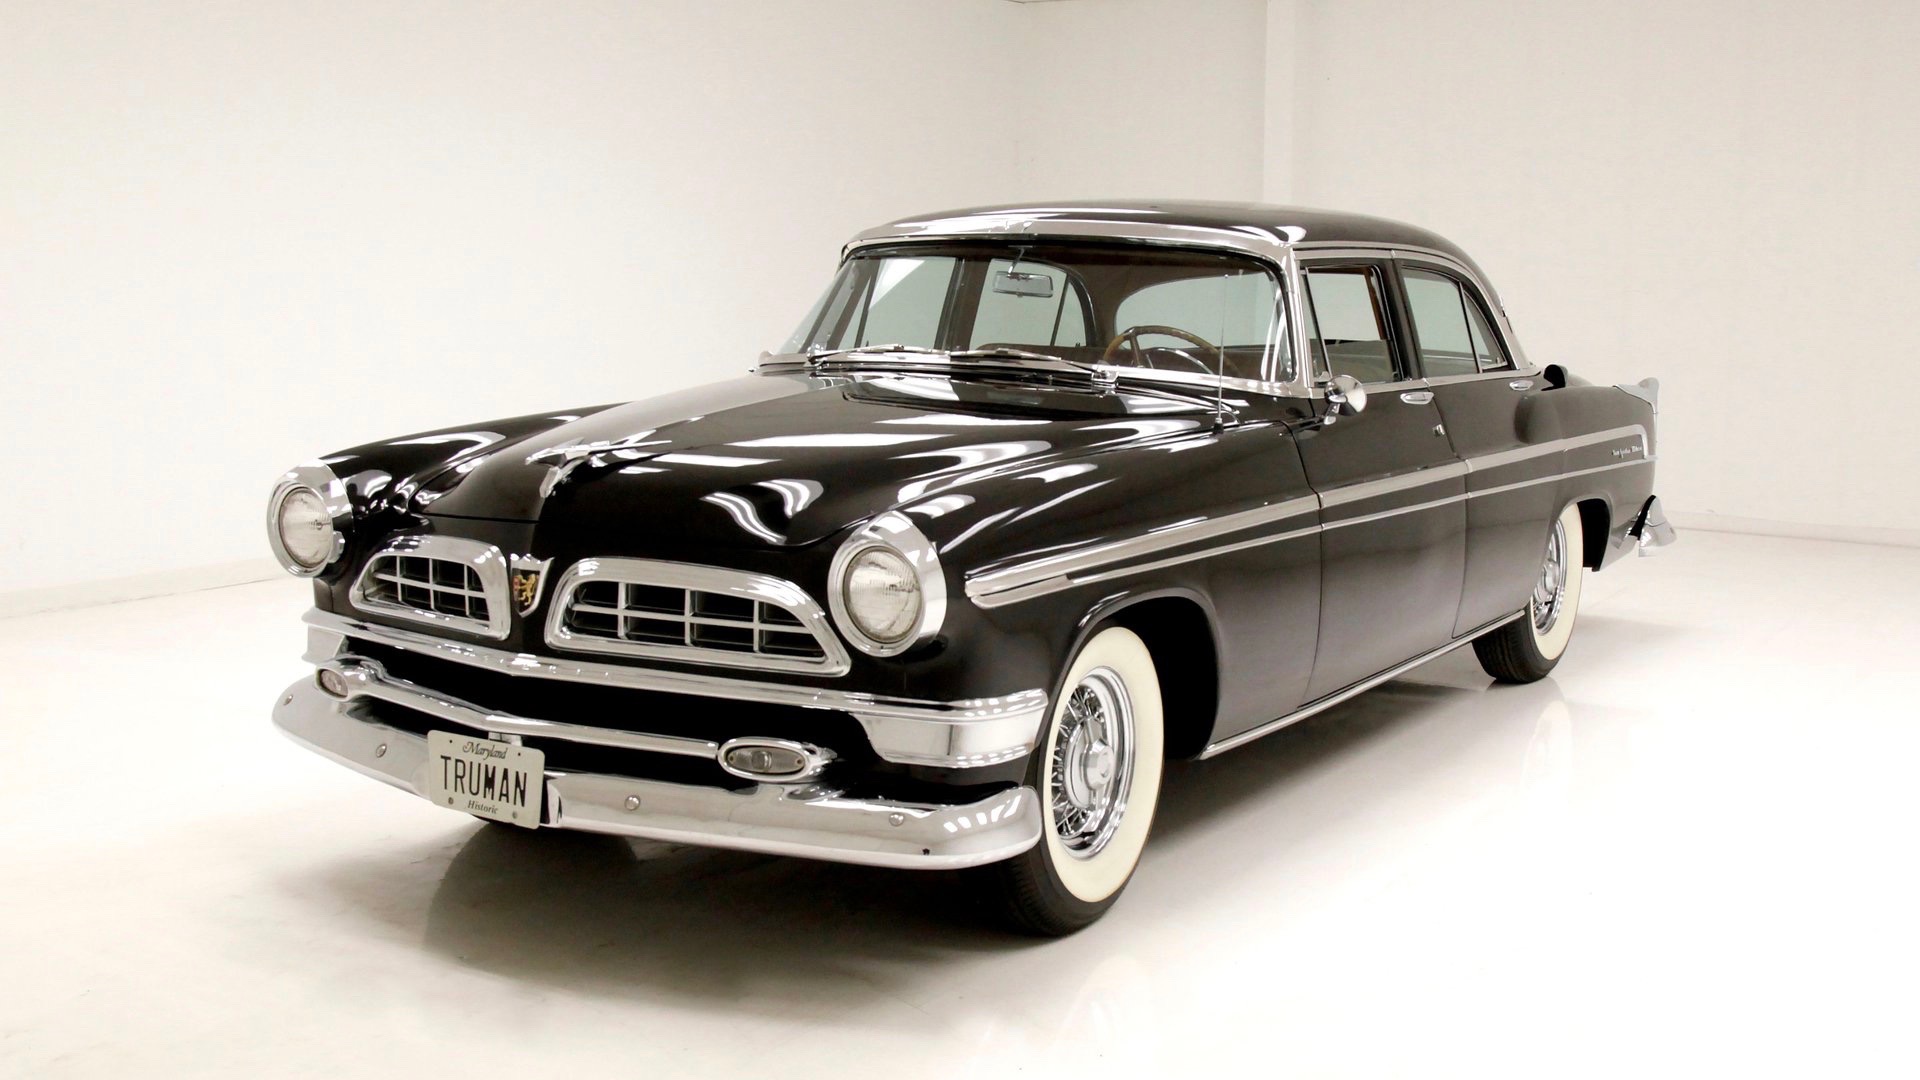 Harry Truman’s 1955 Chrysler New Yorker is for sale Auto Recent